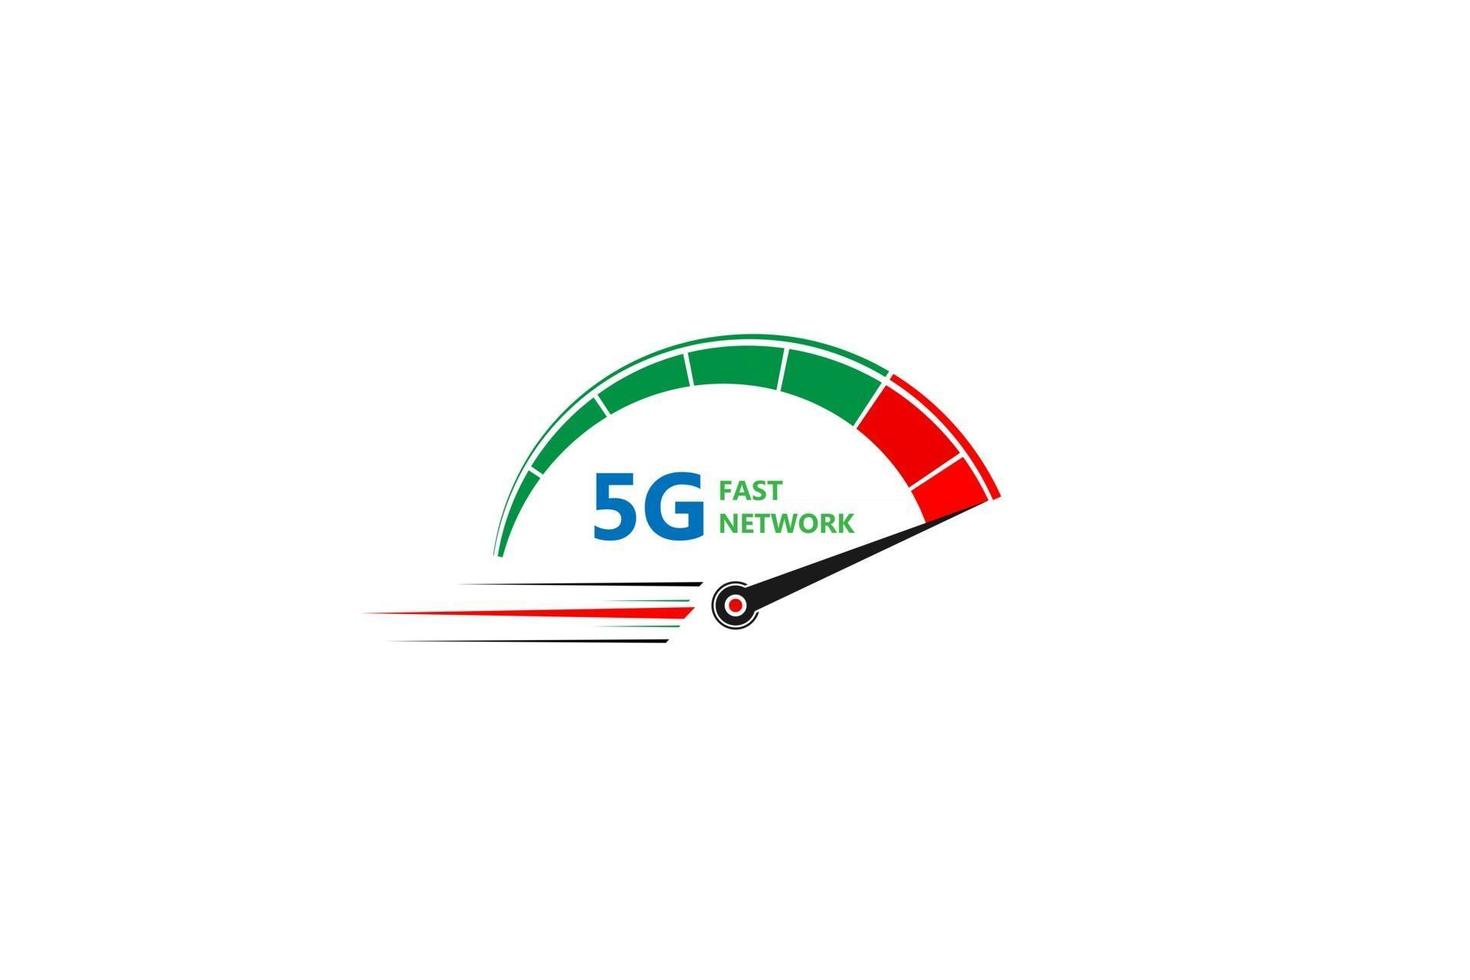 5G logo network speed technology illustration in isolated white background, broadband telecommunication wireless internet concept vector